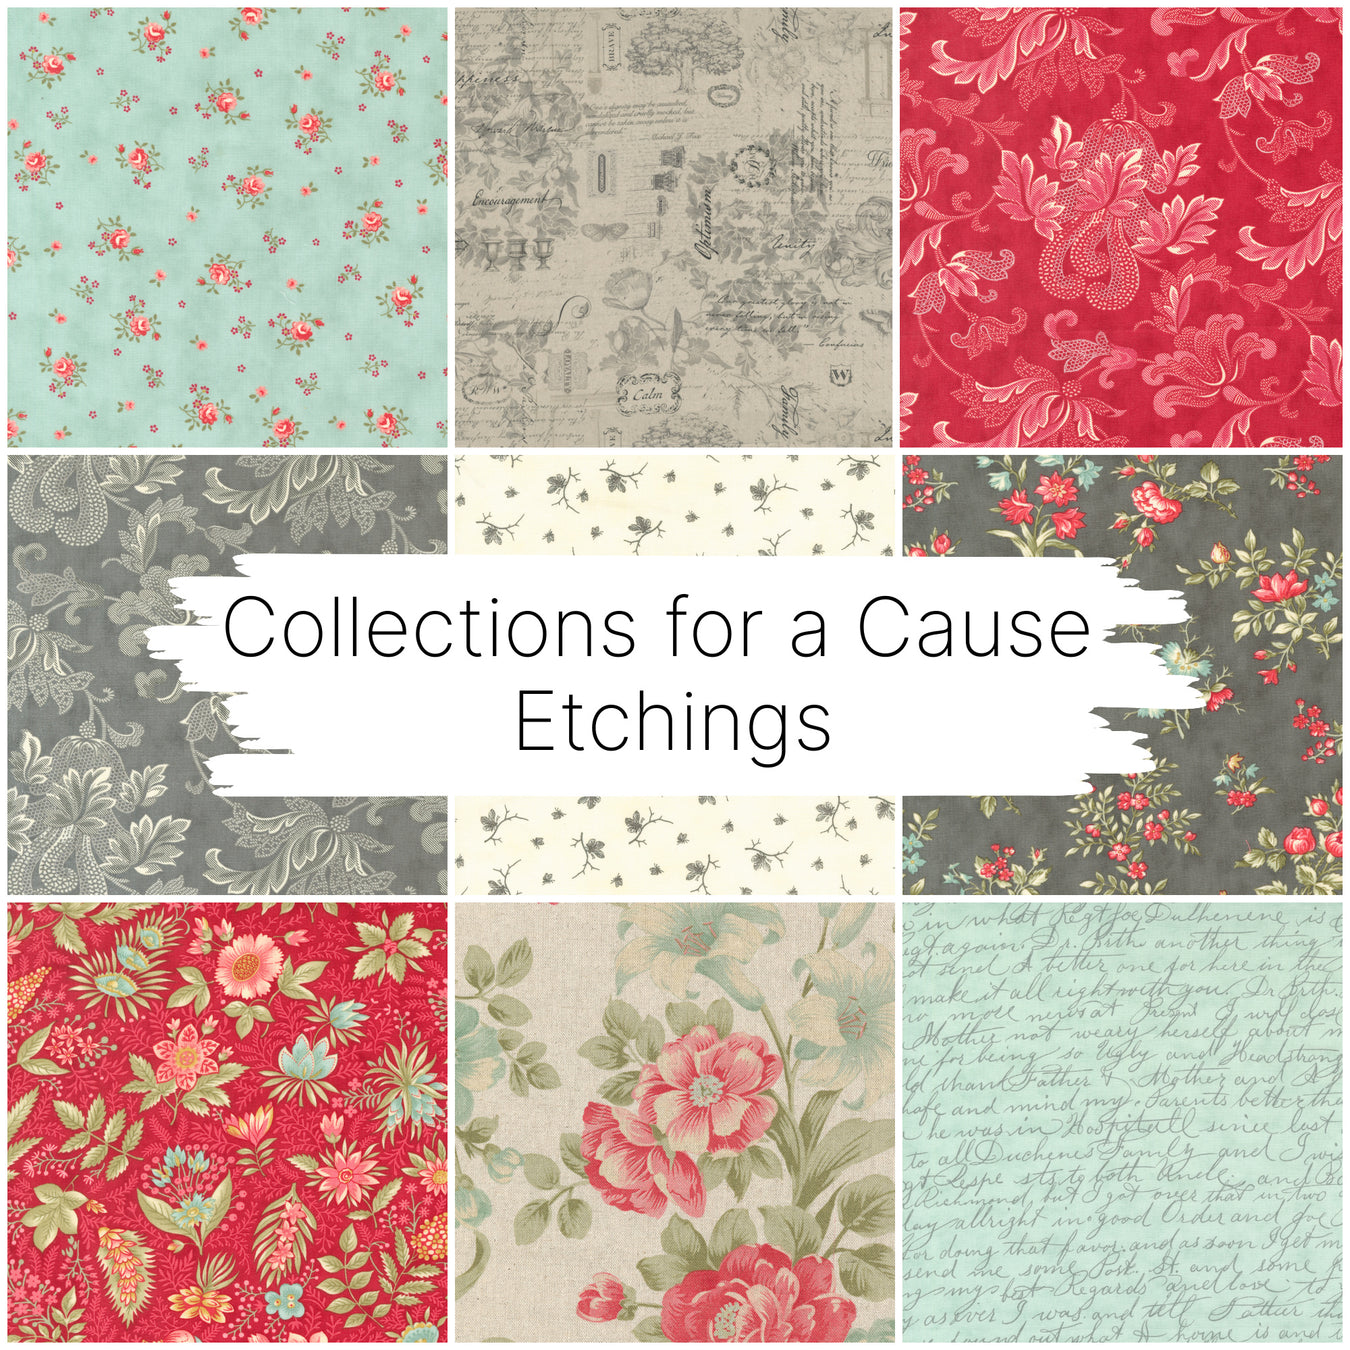 Collections for a Cause Etchings